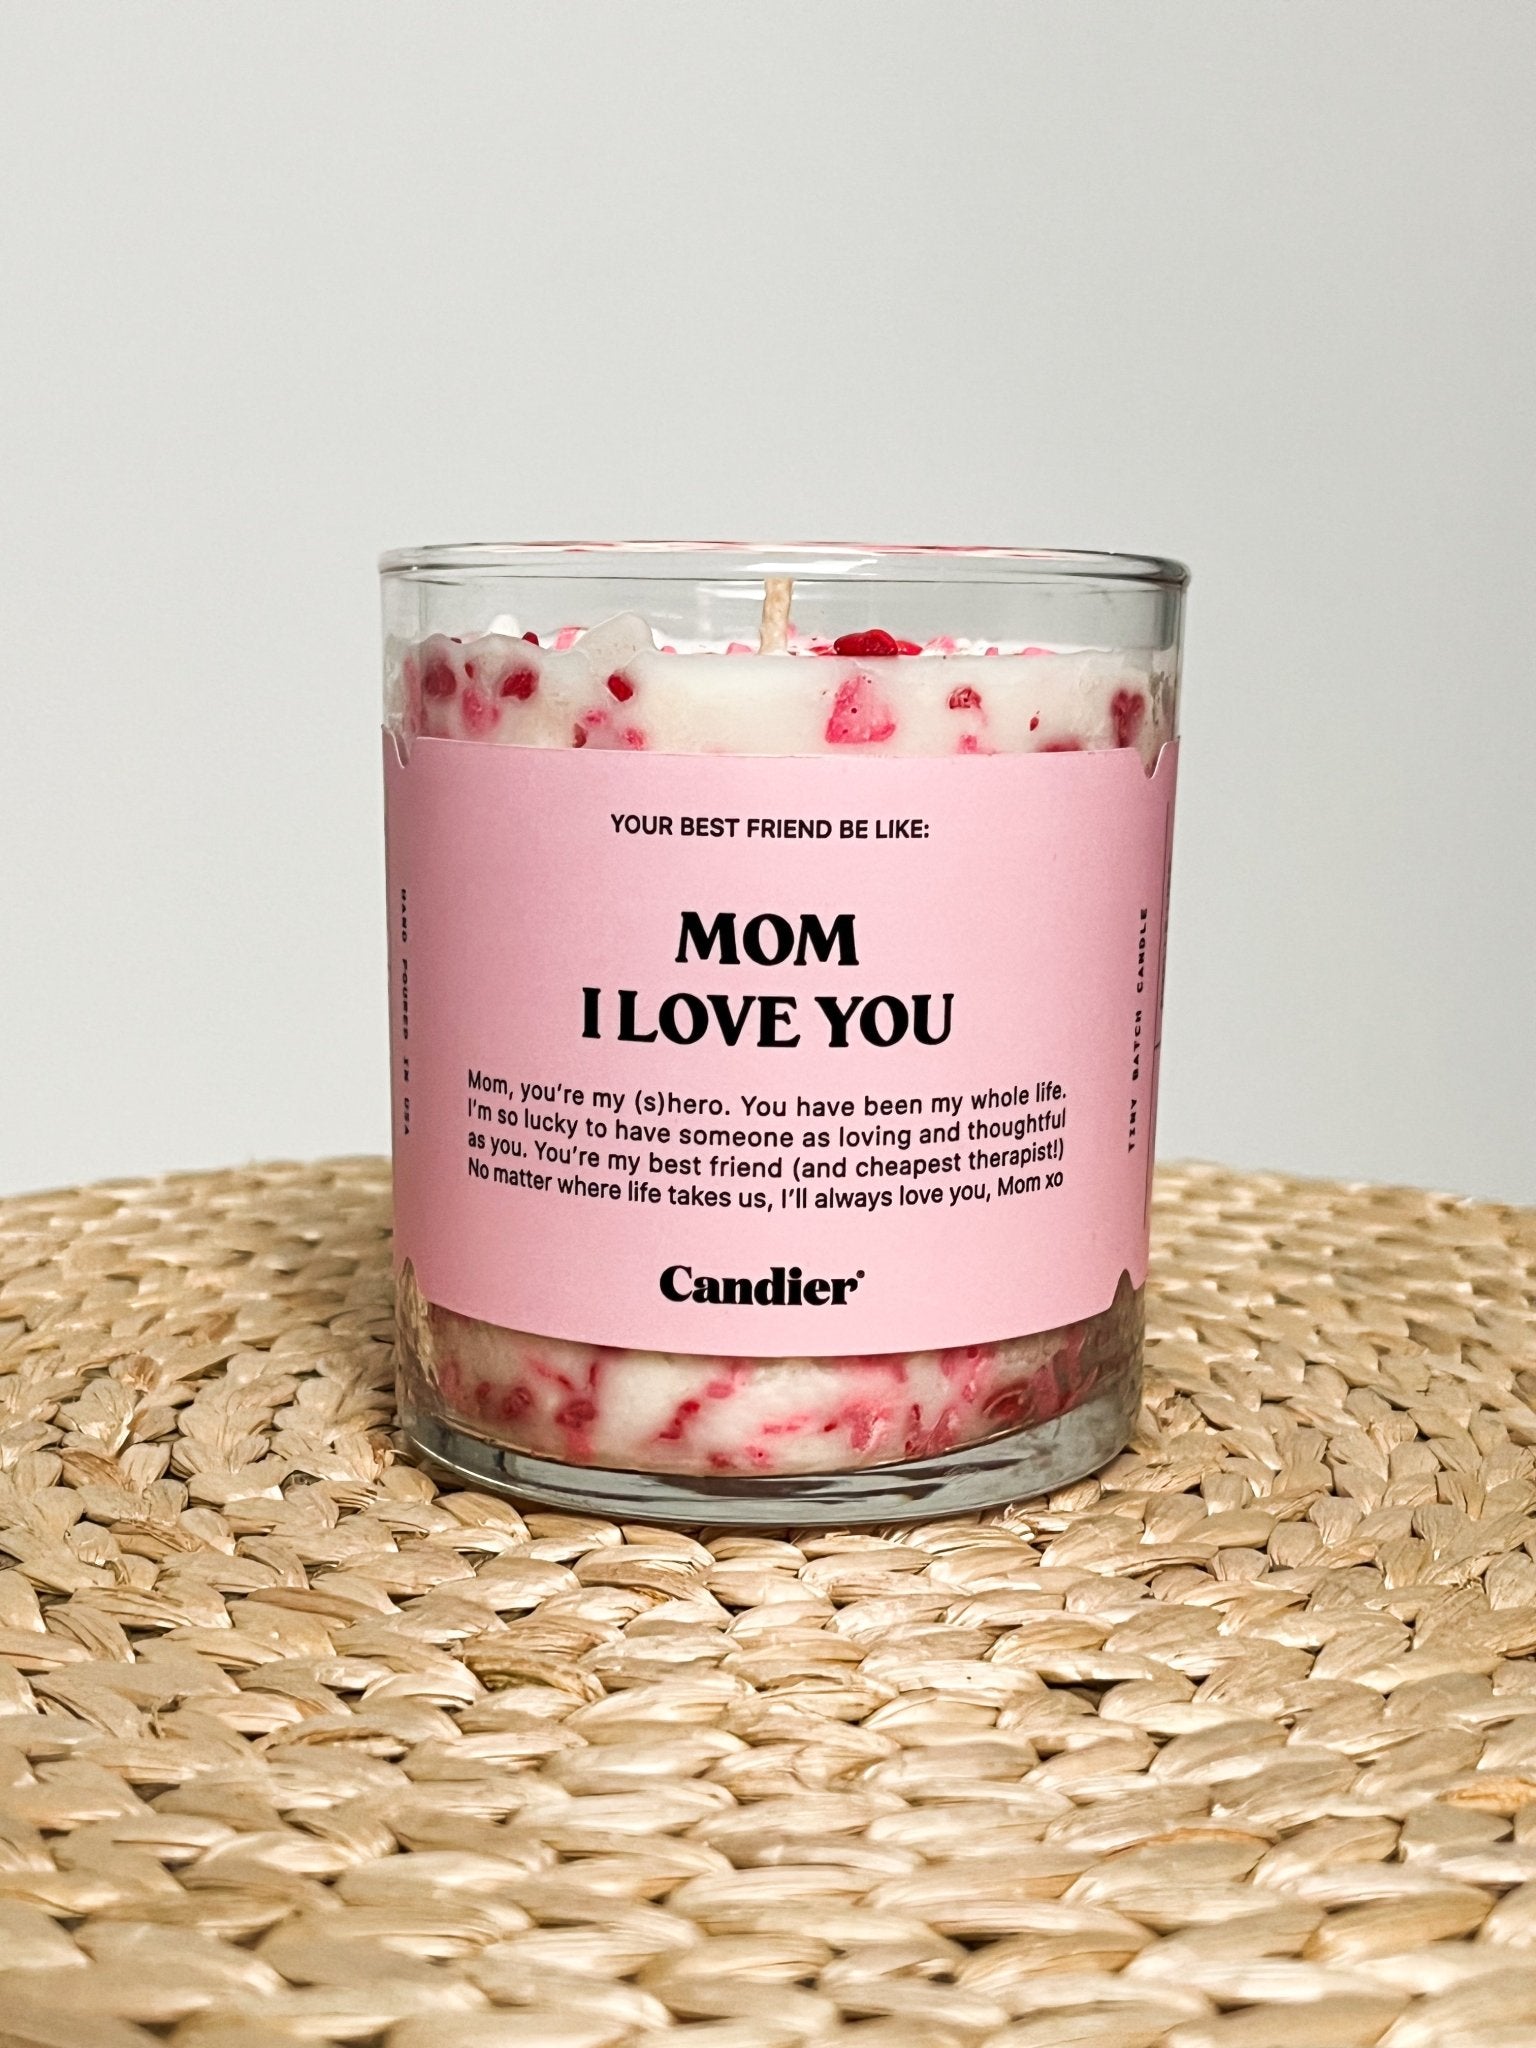 Mom I love you candle 9 oz - Stylish candle - Trendy Gifts for Mom at Lush Fashion Lounge in Oklahoma